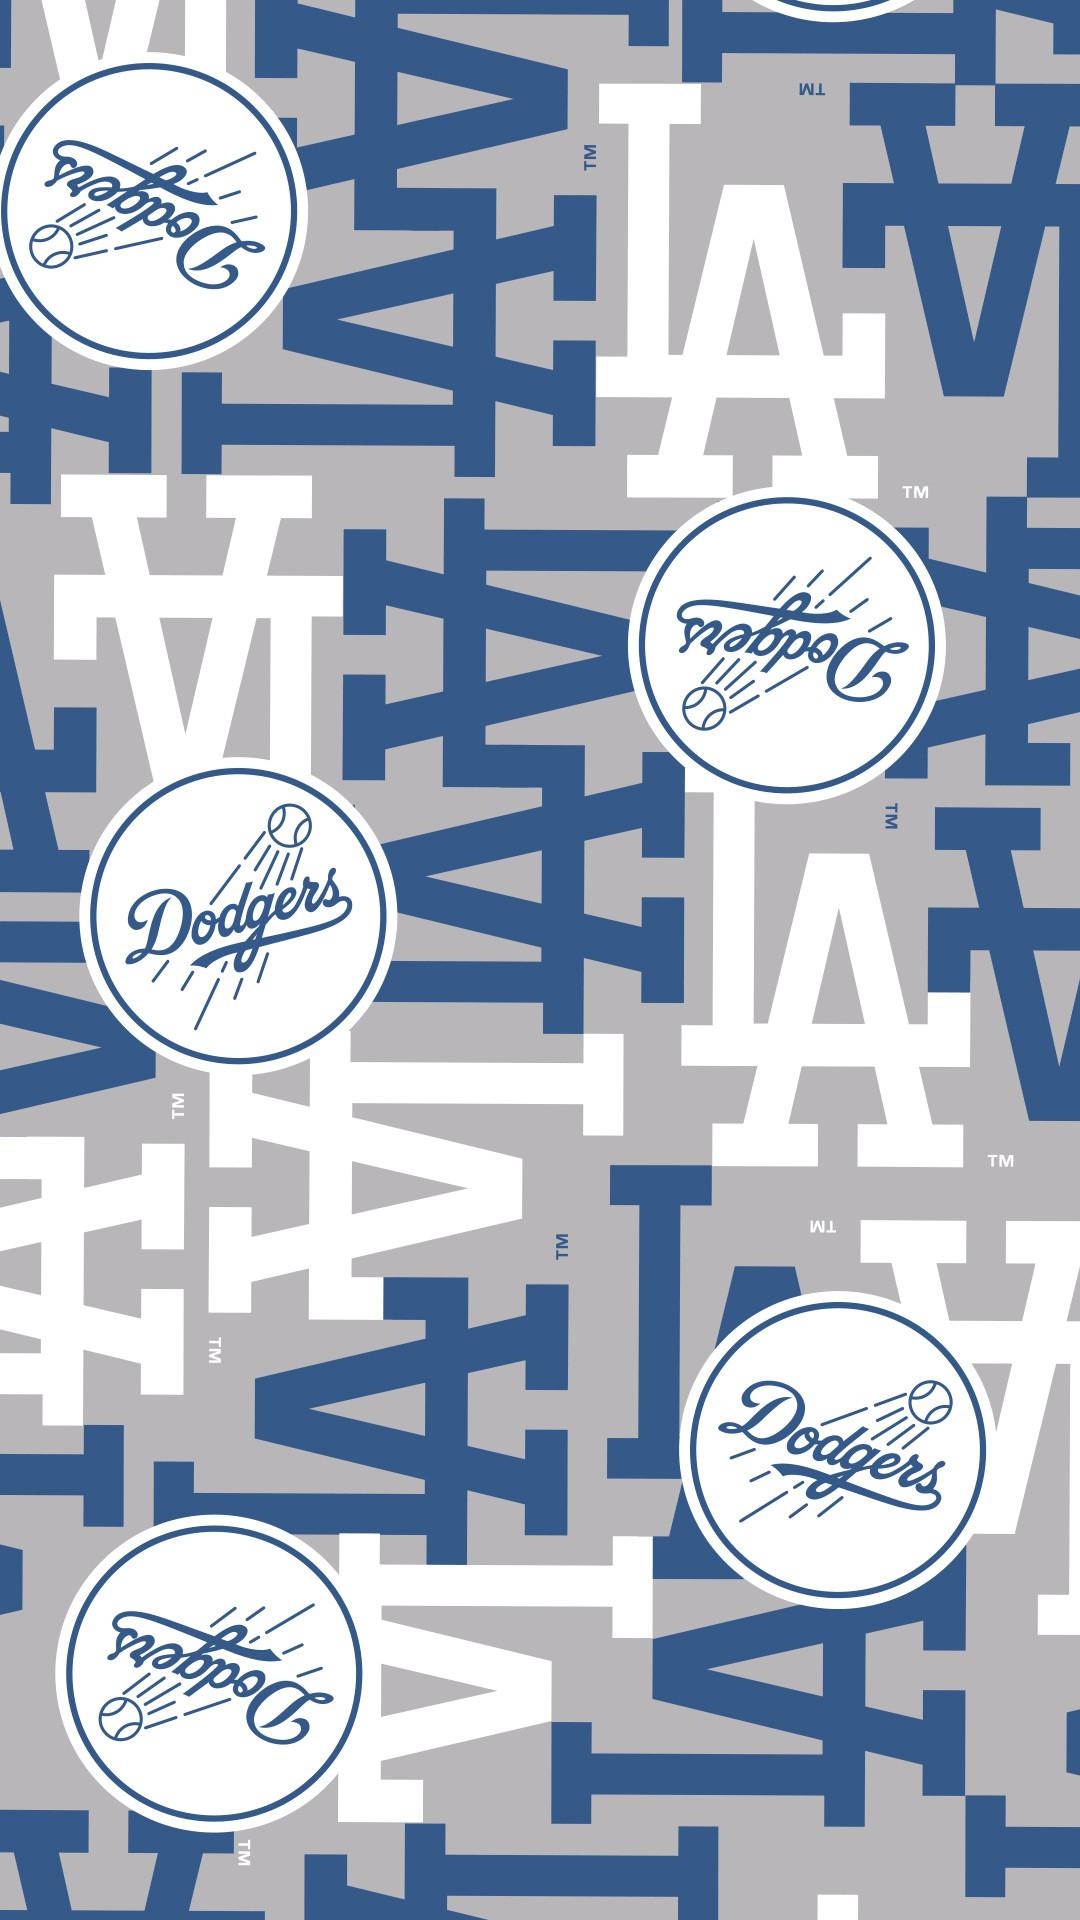 Dodgers iPhone wallpapers, Sports team pride, High-quality visuals, Dynamic gameplay, 1080x1920 Full HD Phone